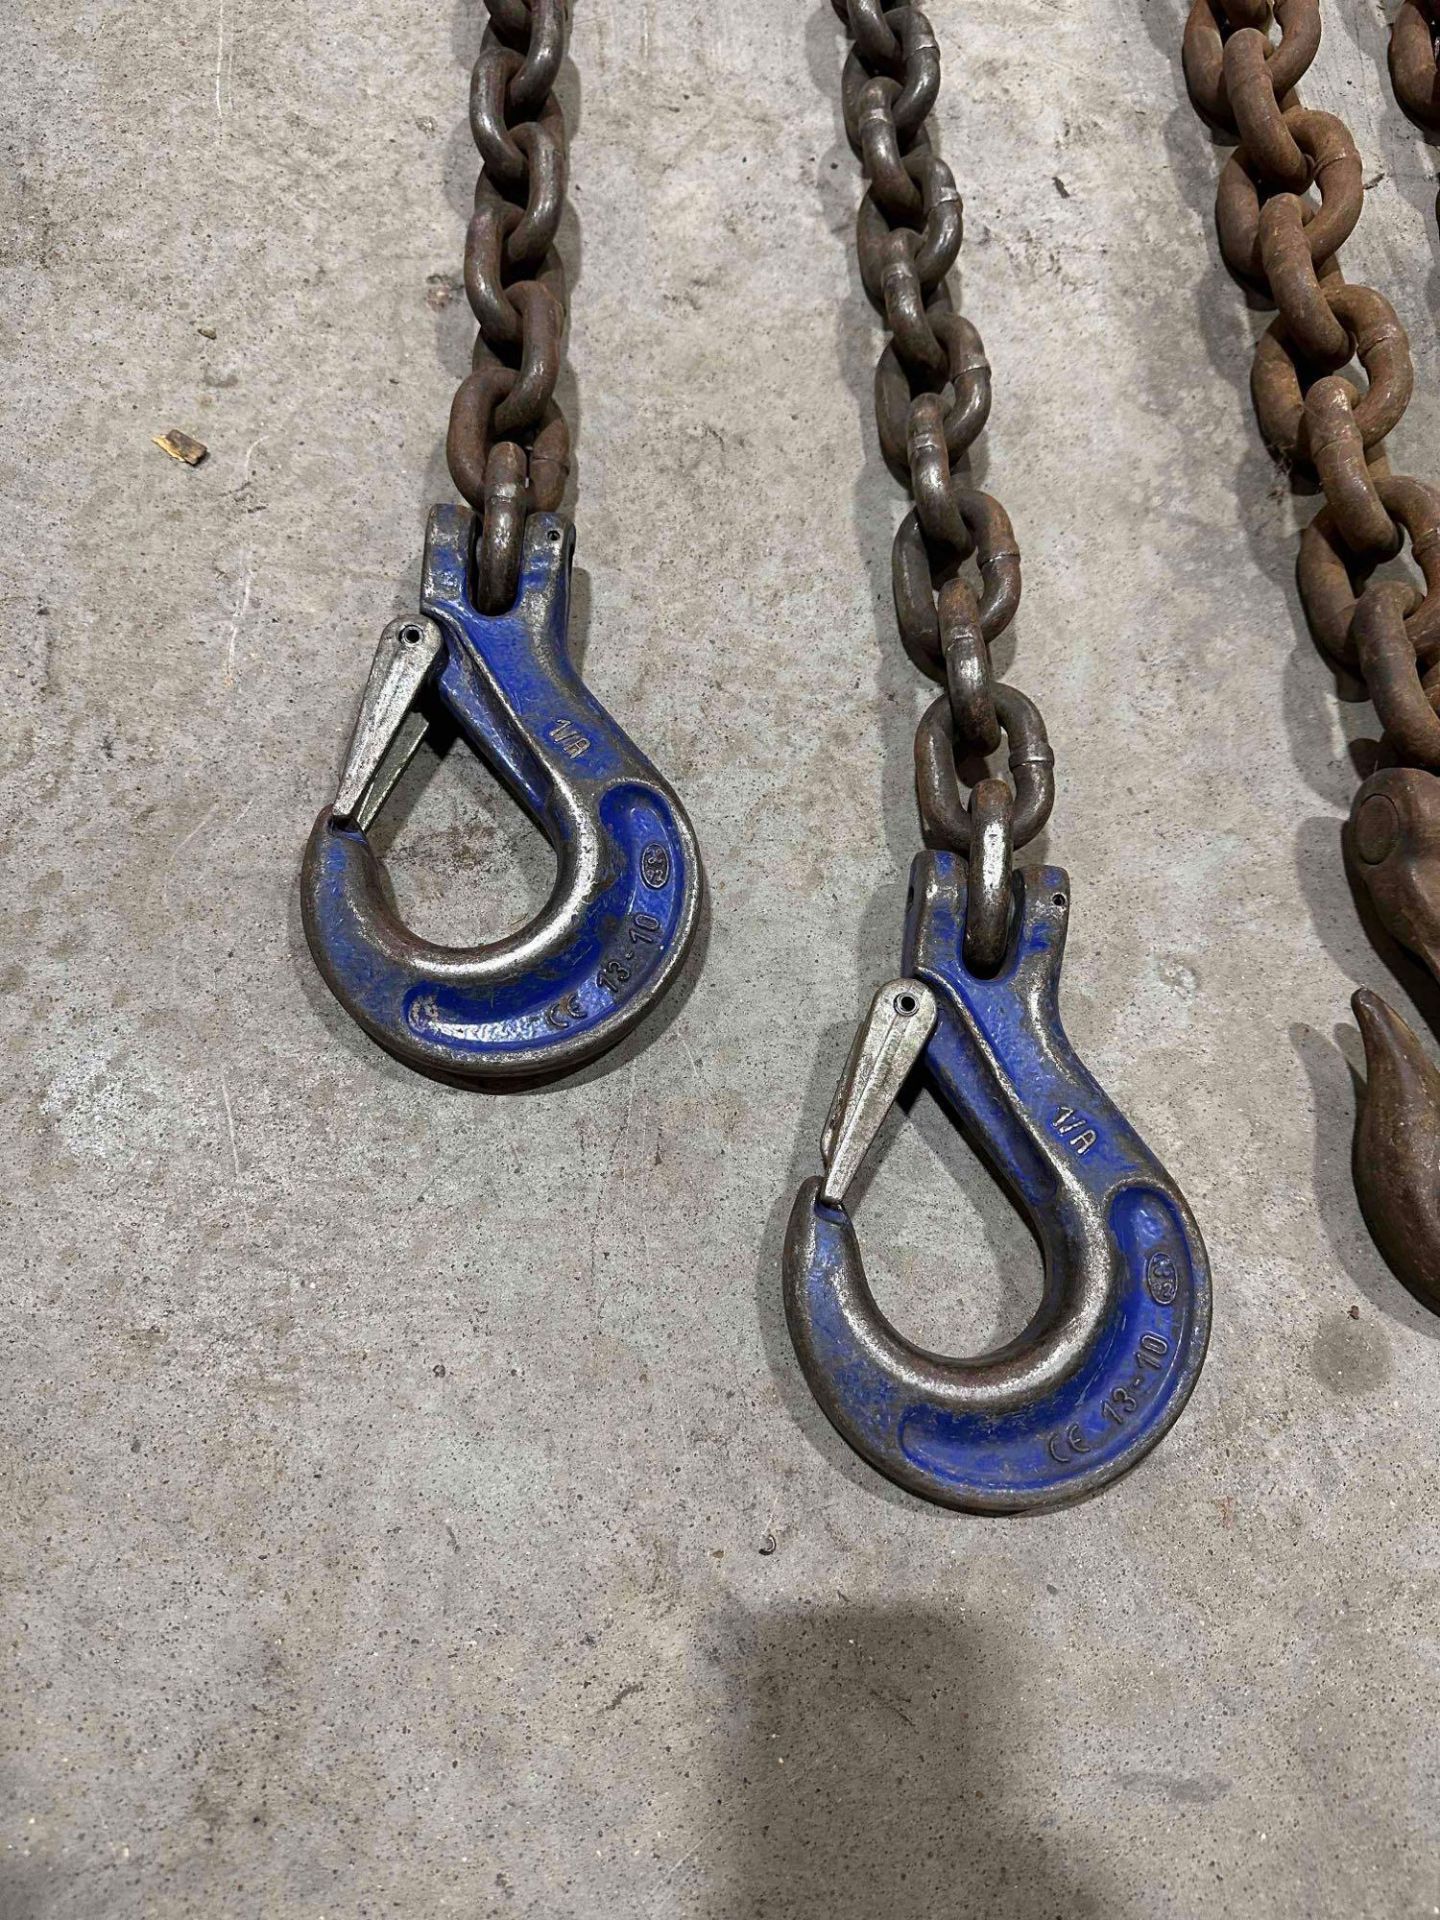 Lot of 2 Chains with Hooks, Assorted Lengths - Image 5 of 6